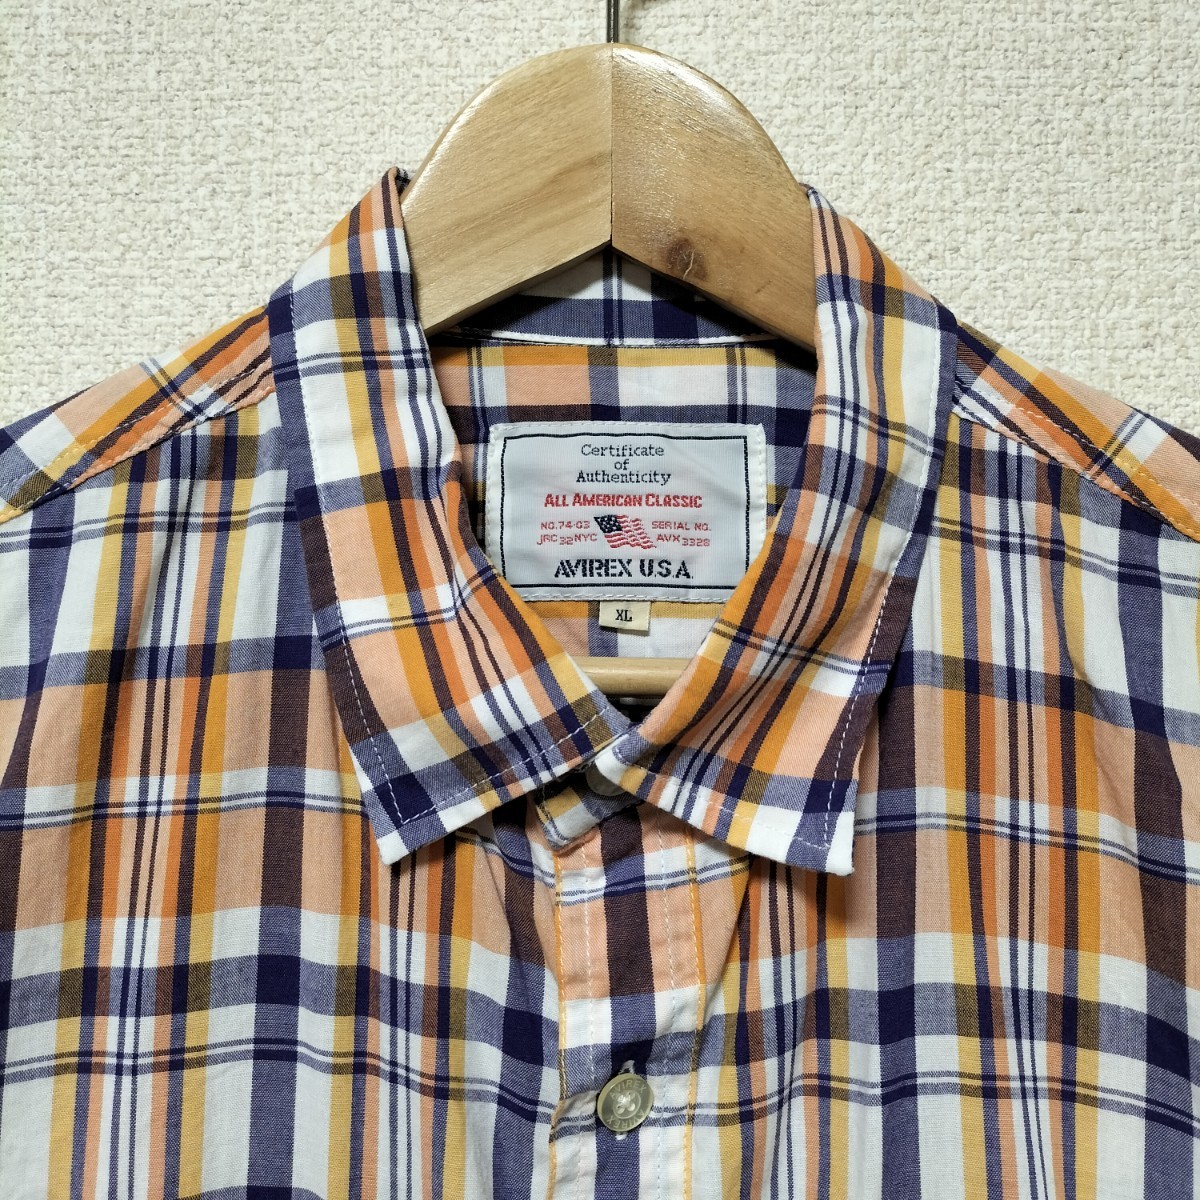  beautiful goods *AVIREX USAma gong s check work shirt cotton men's size XL cotton short sleeves orange navy blue white Avirex American Casual brand old clothes USED